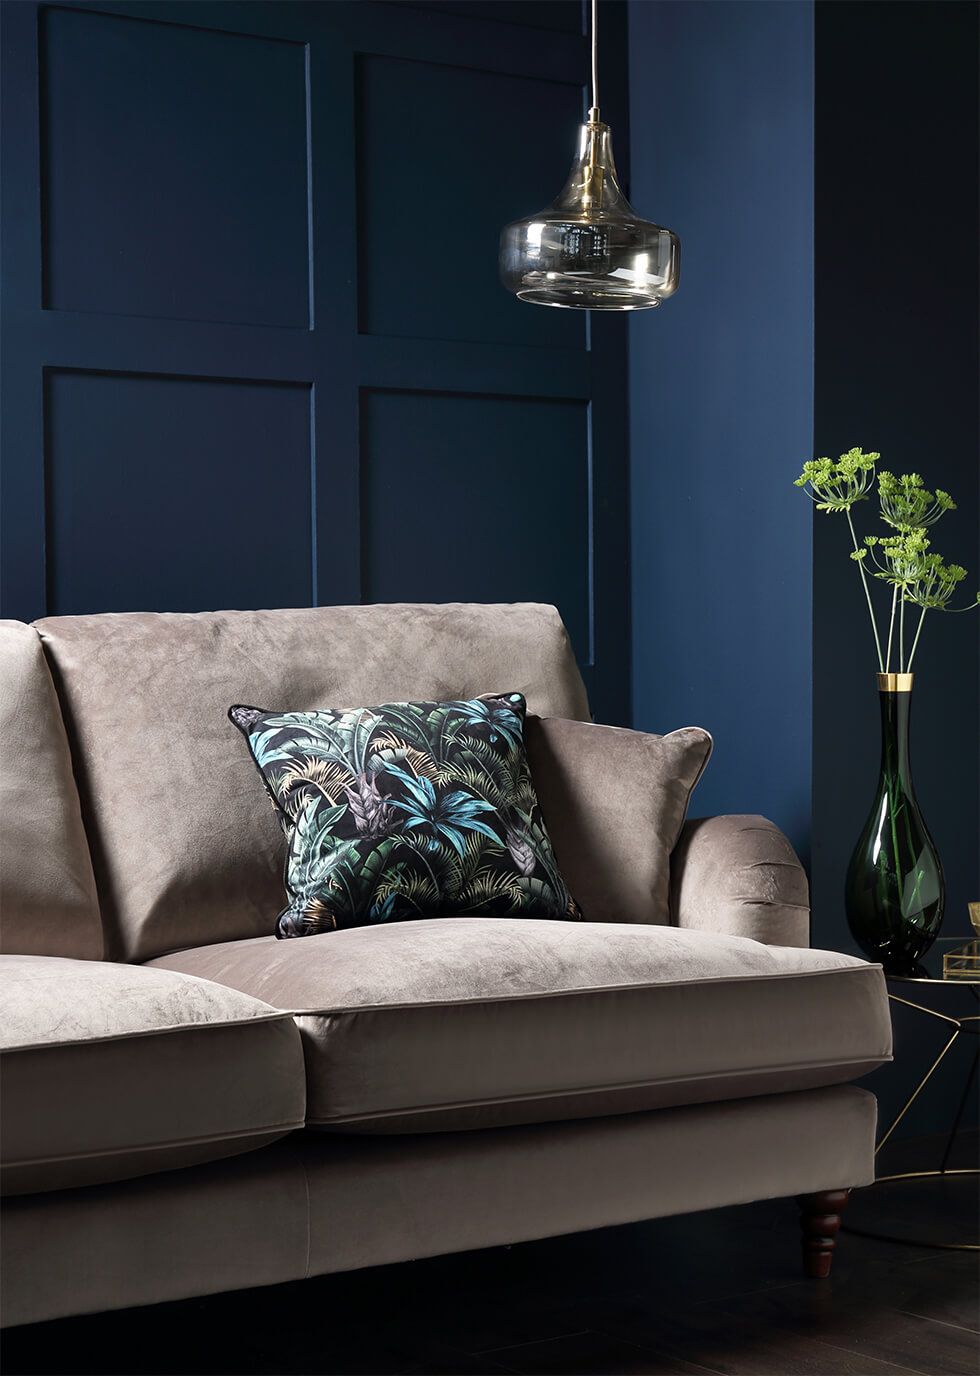 Sophisticated living room with a navy wood-panelled accent wall, grey sofa and pendant lamp